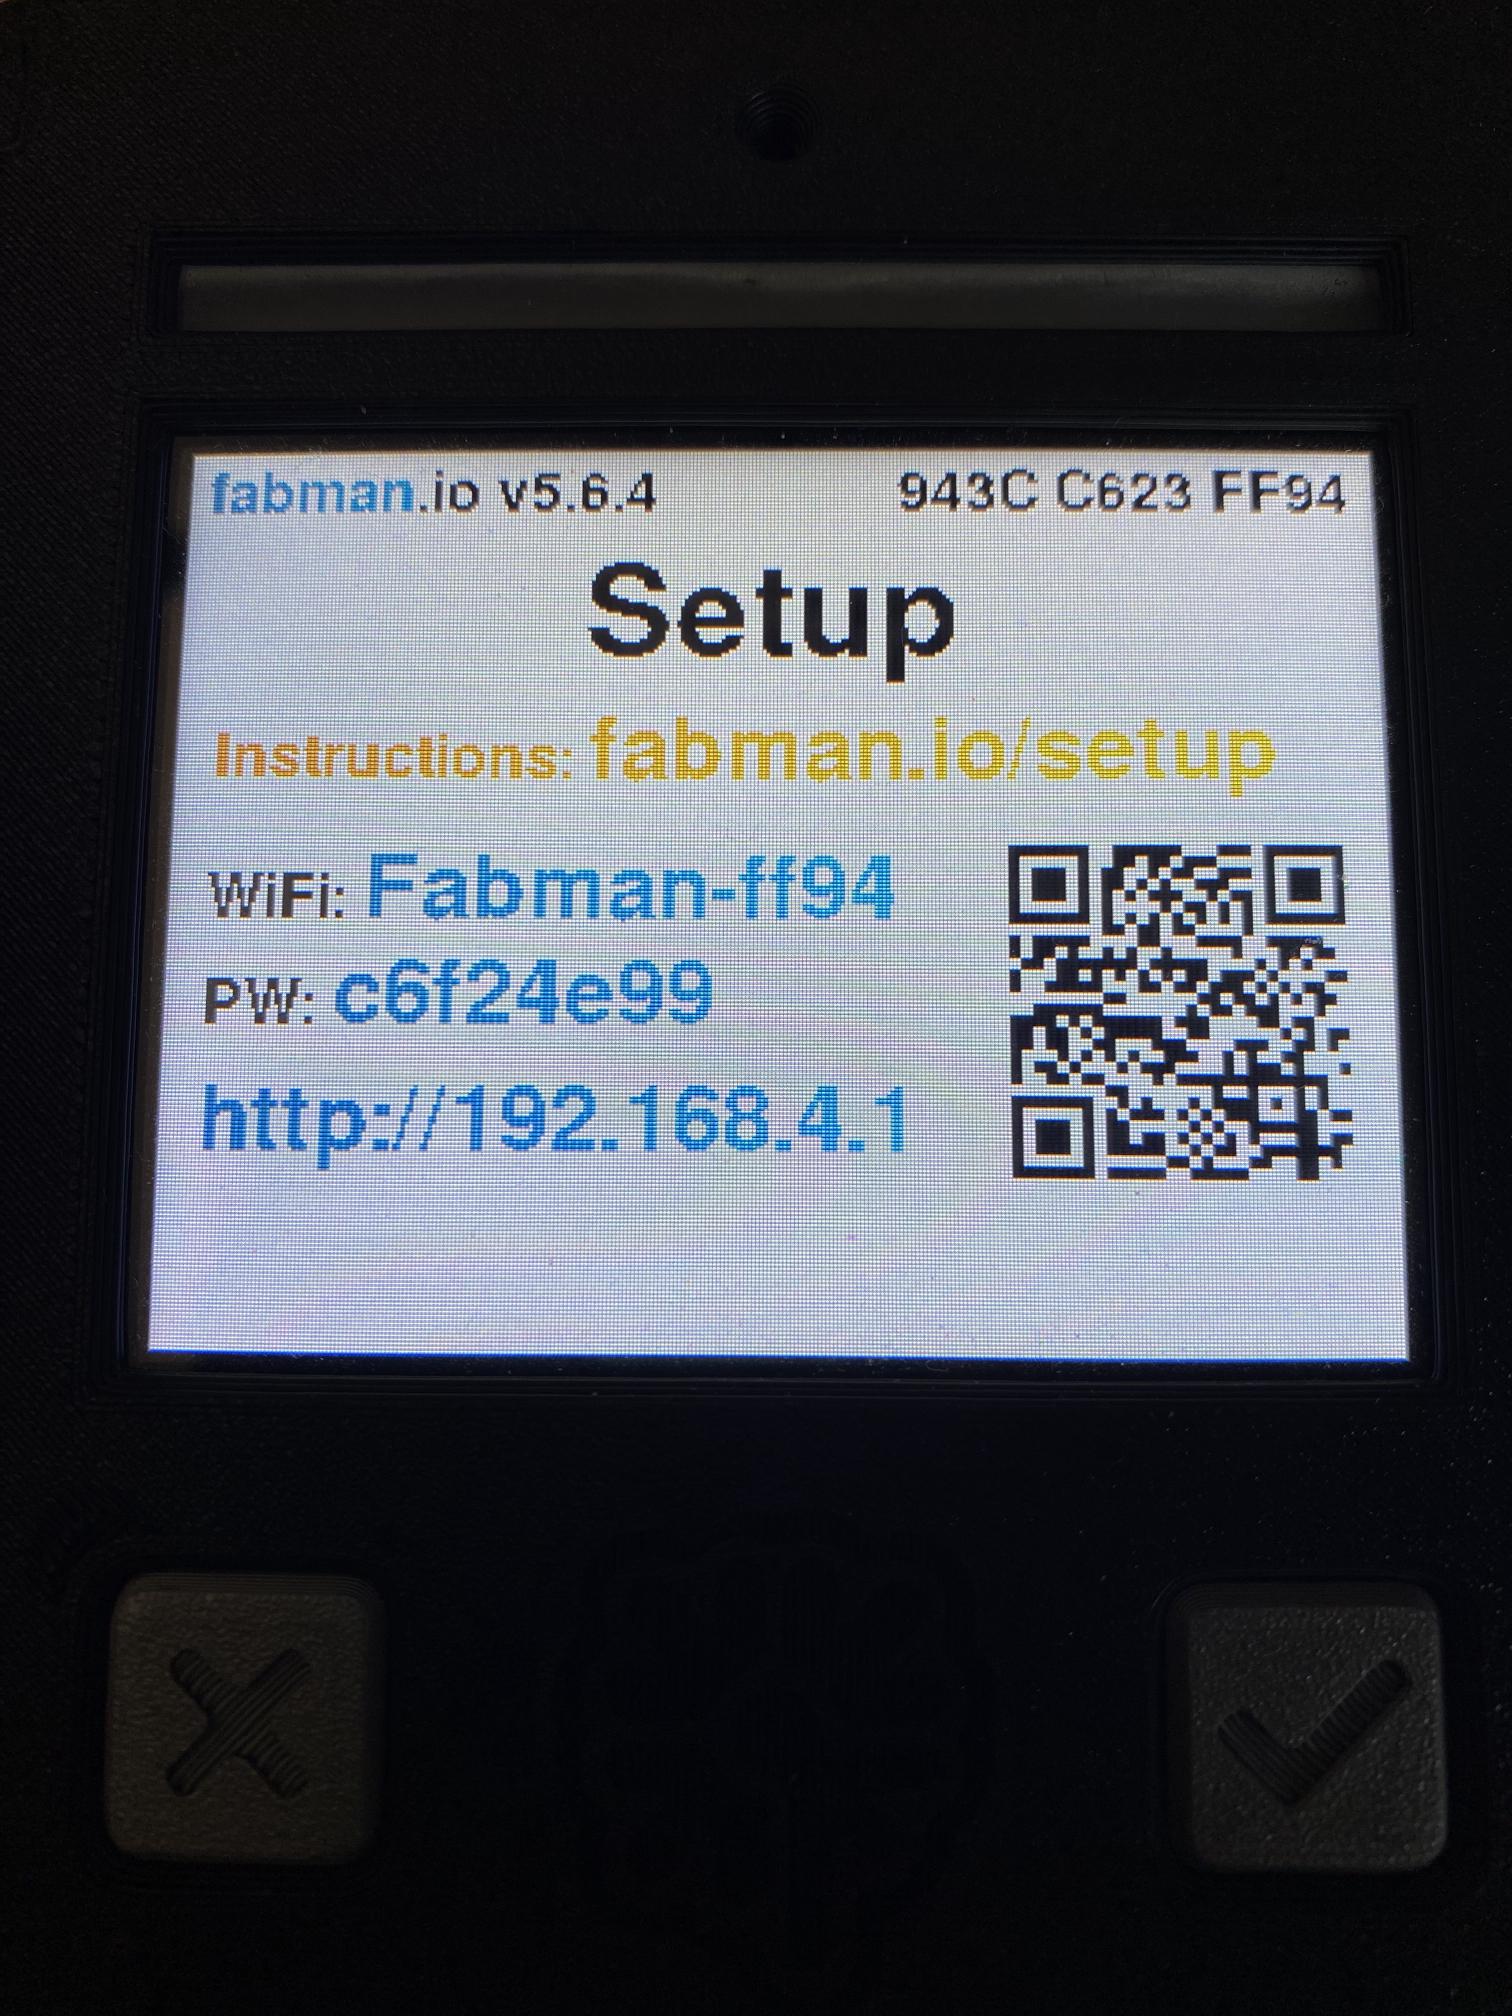 The new setup screen with a WiFi QR code.